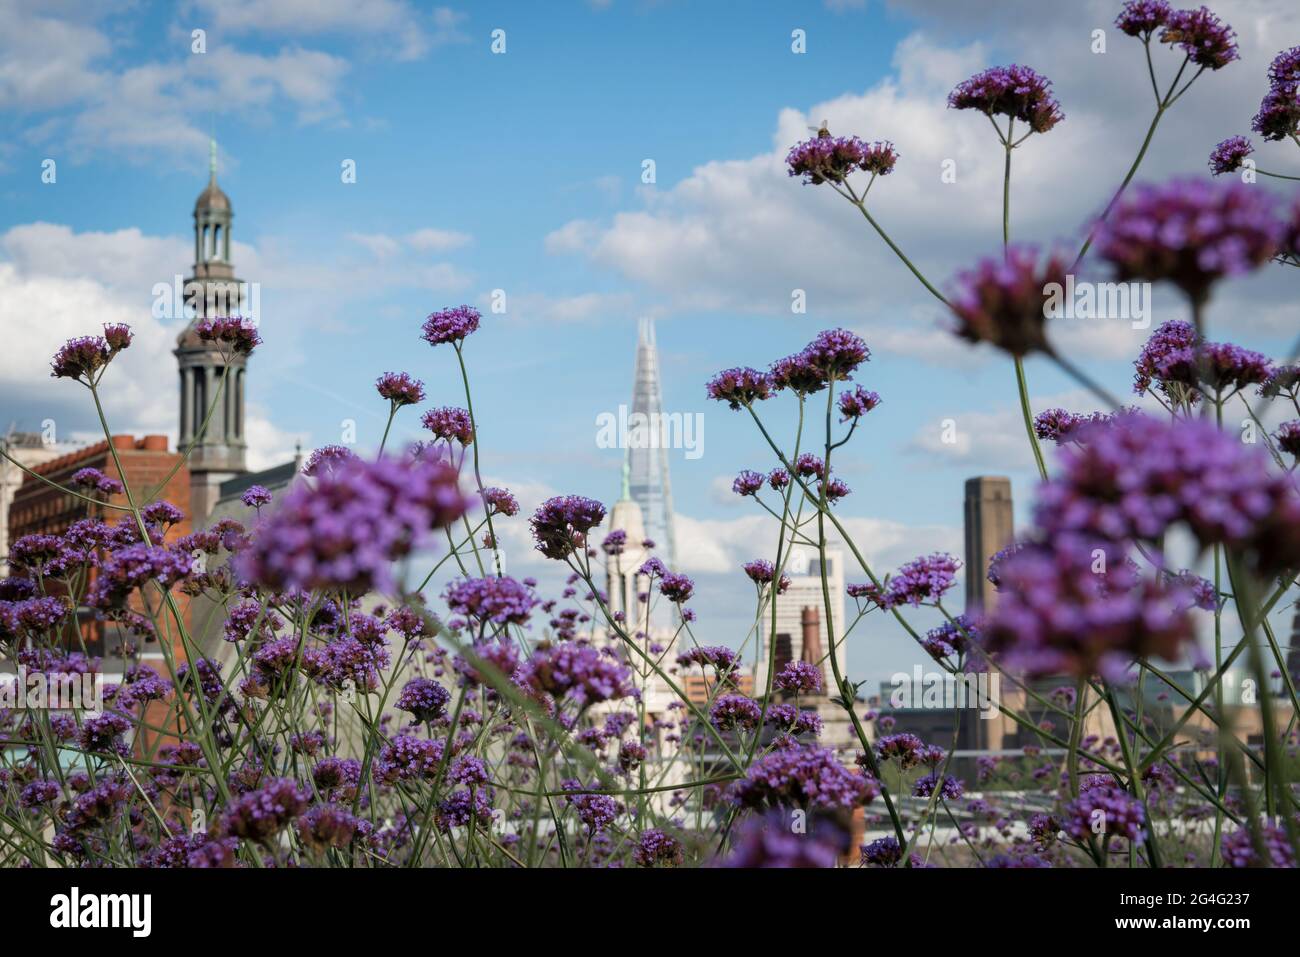 The Hachette roof garden overlooking the river Thames in London, England Stock Photo